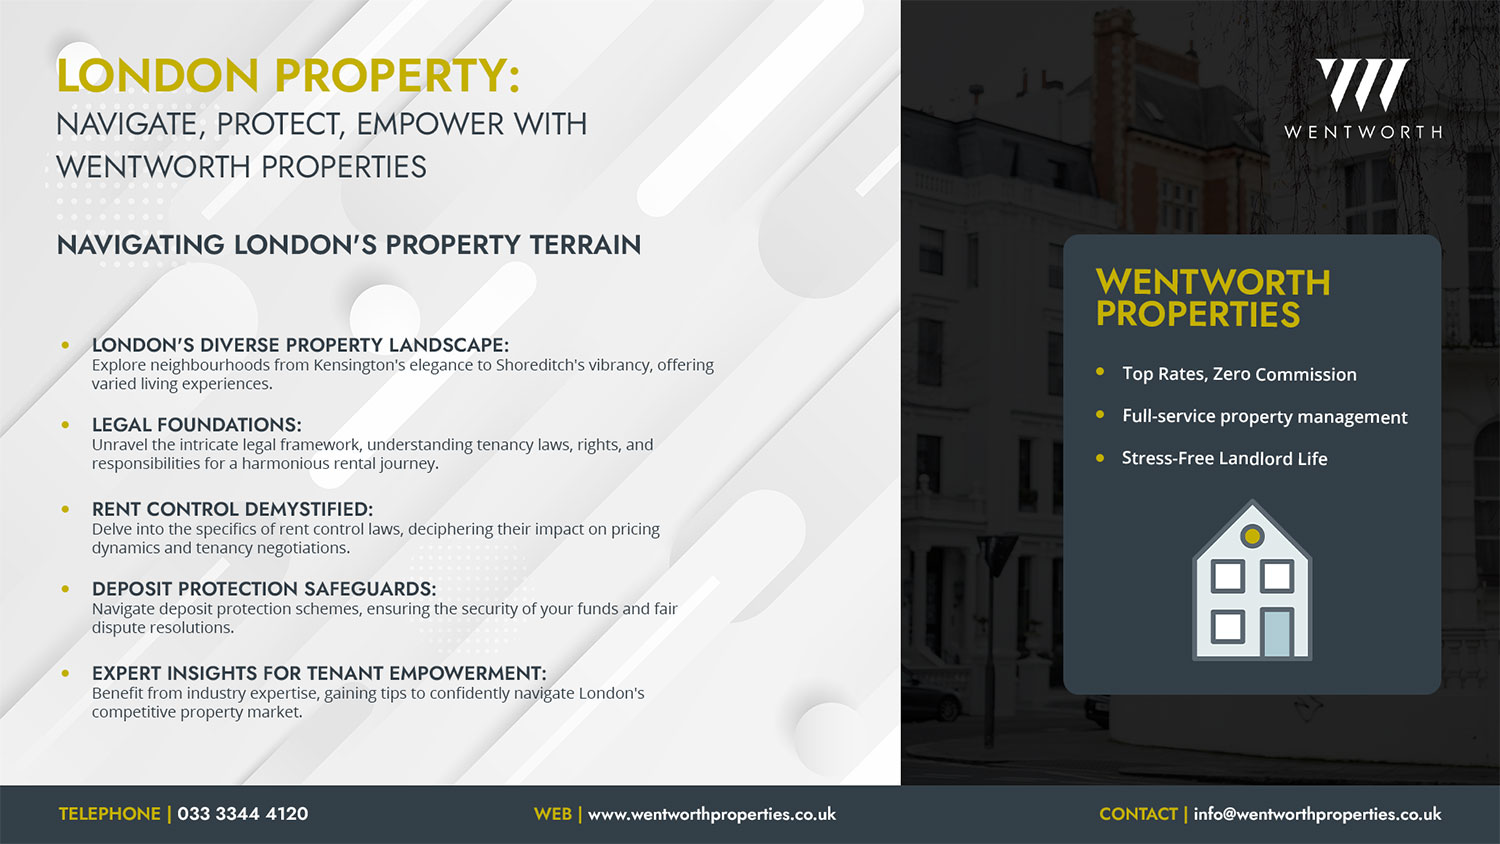 Information about Property management experts in London